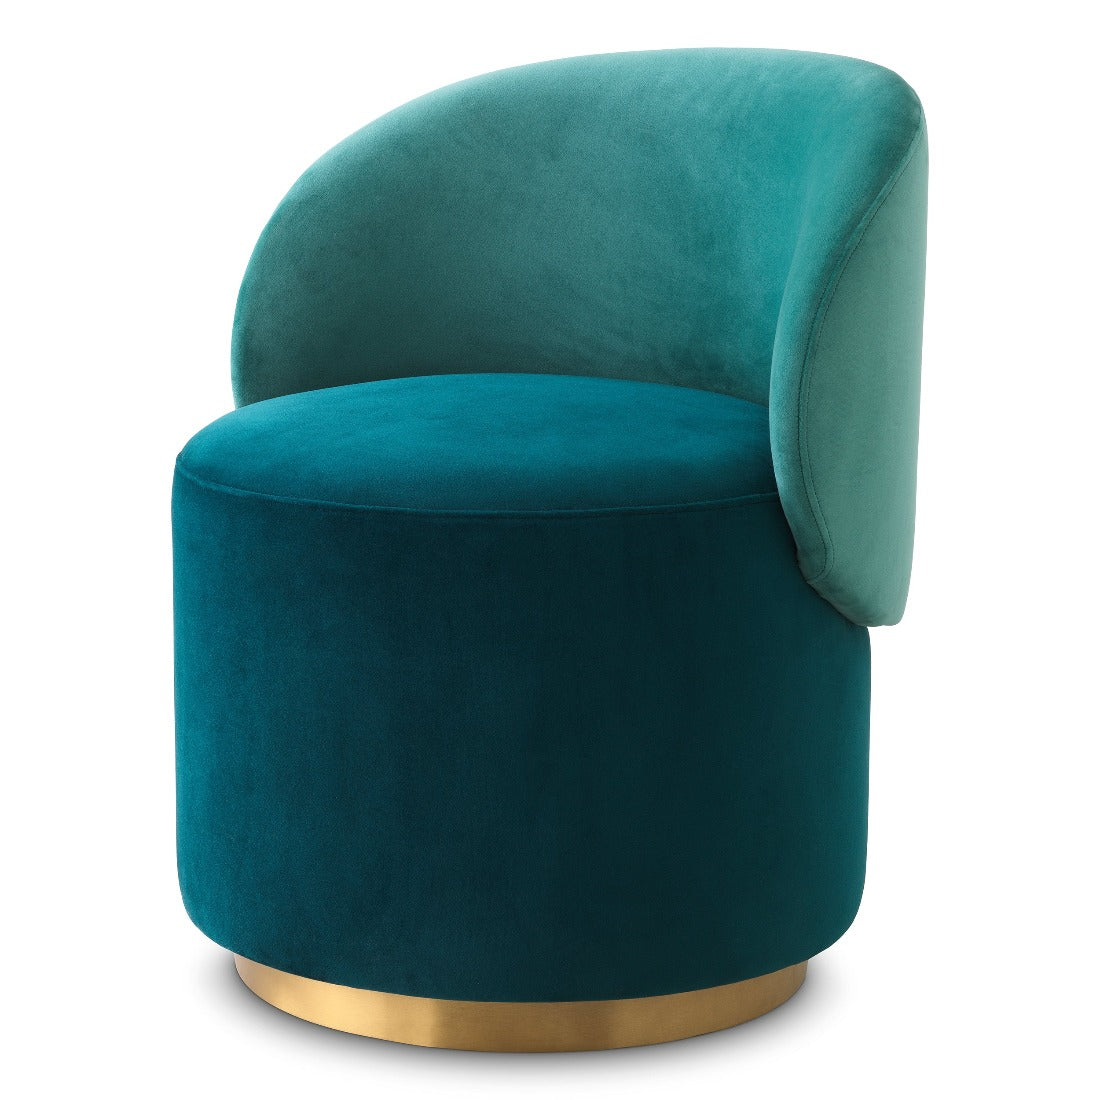 Low swivel dining chair Eichholtz Greer turquoise